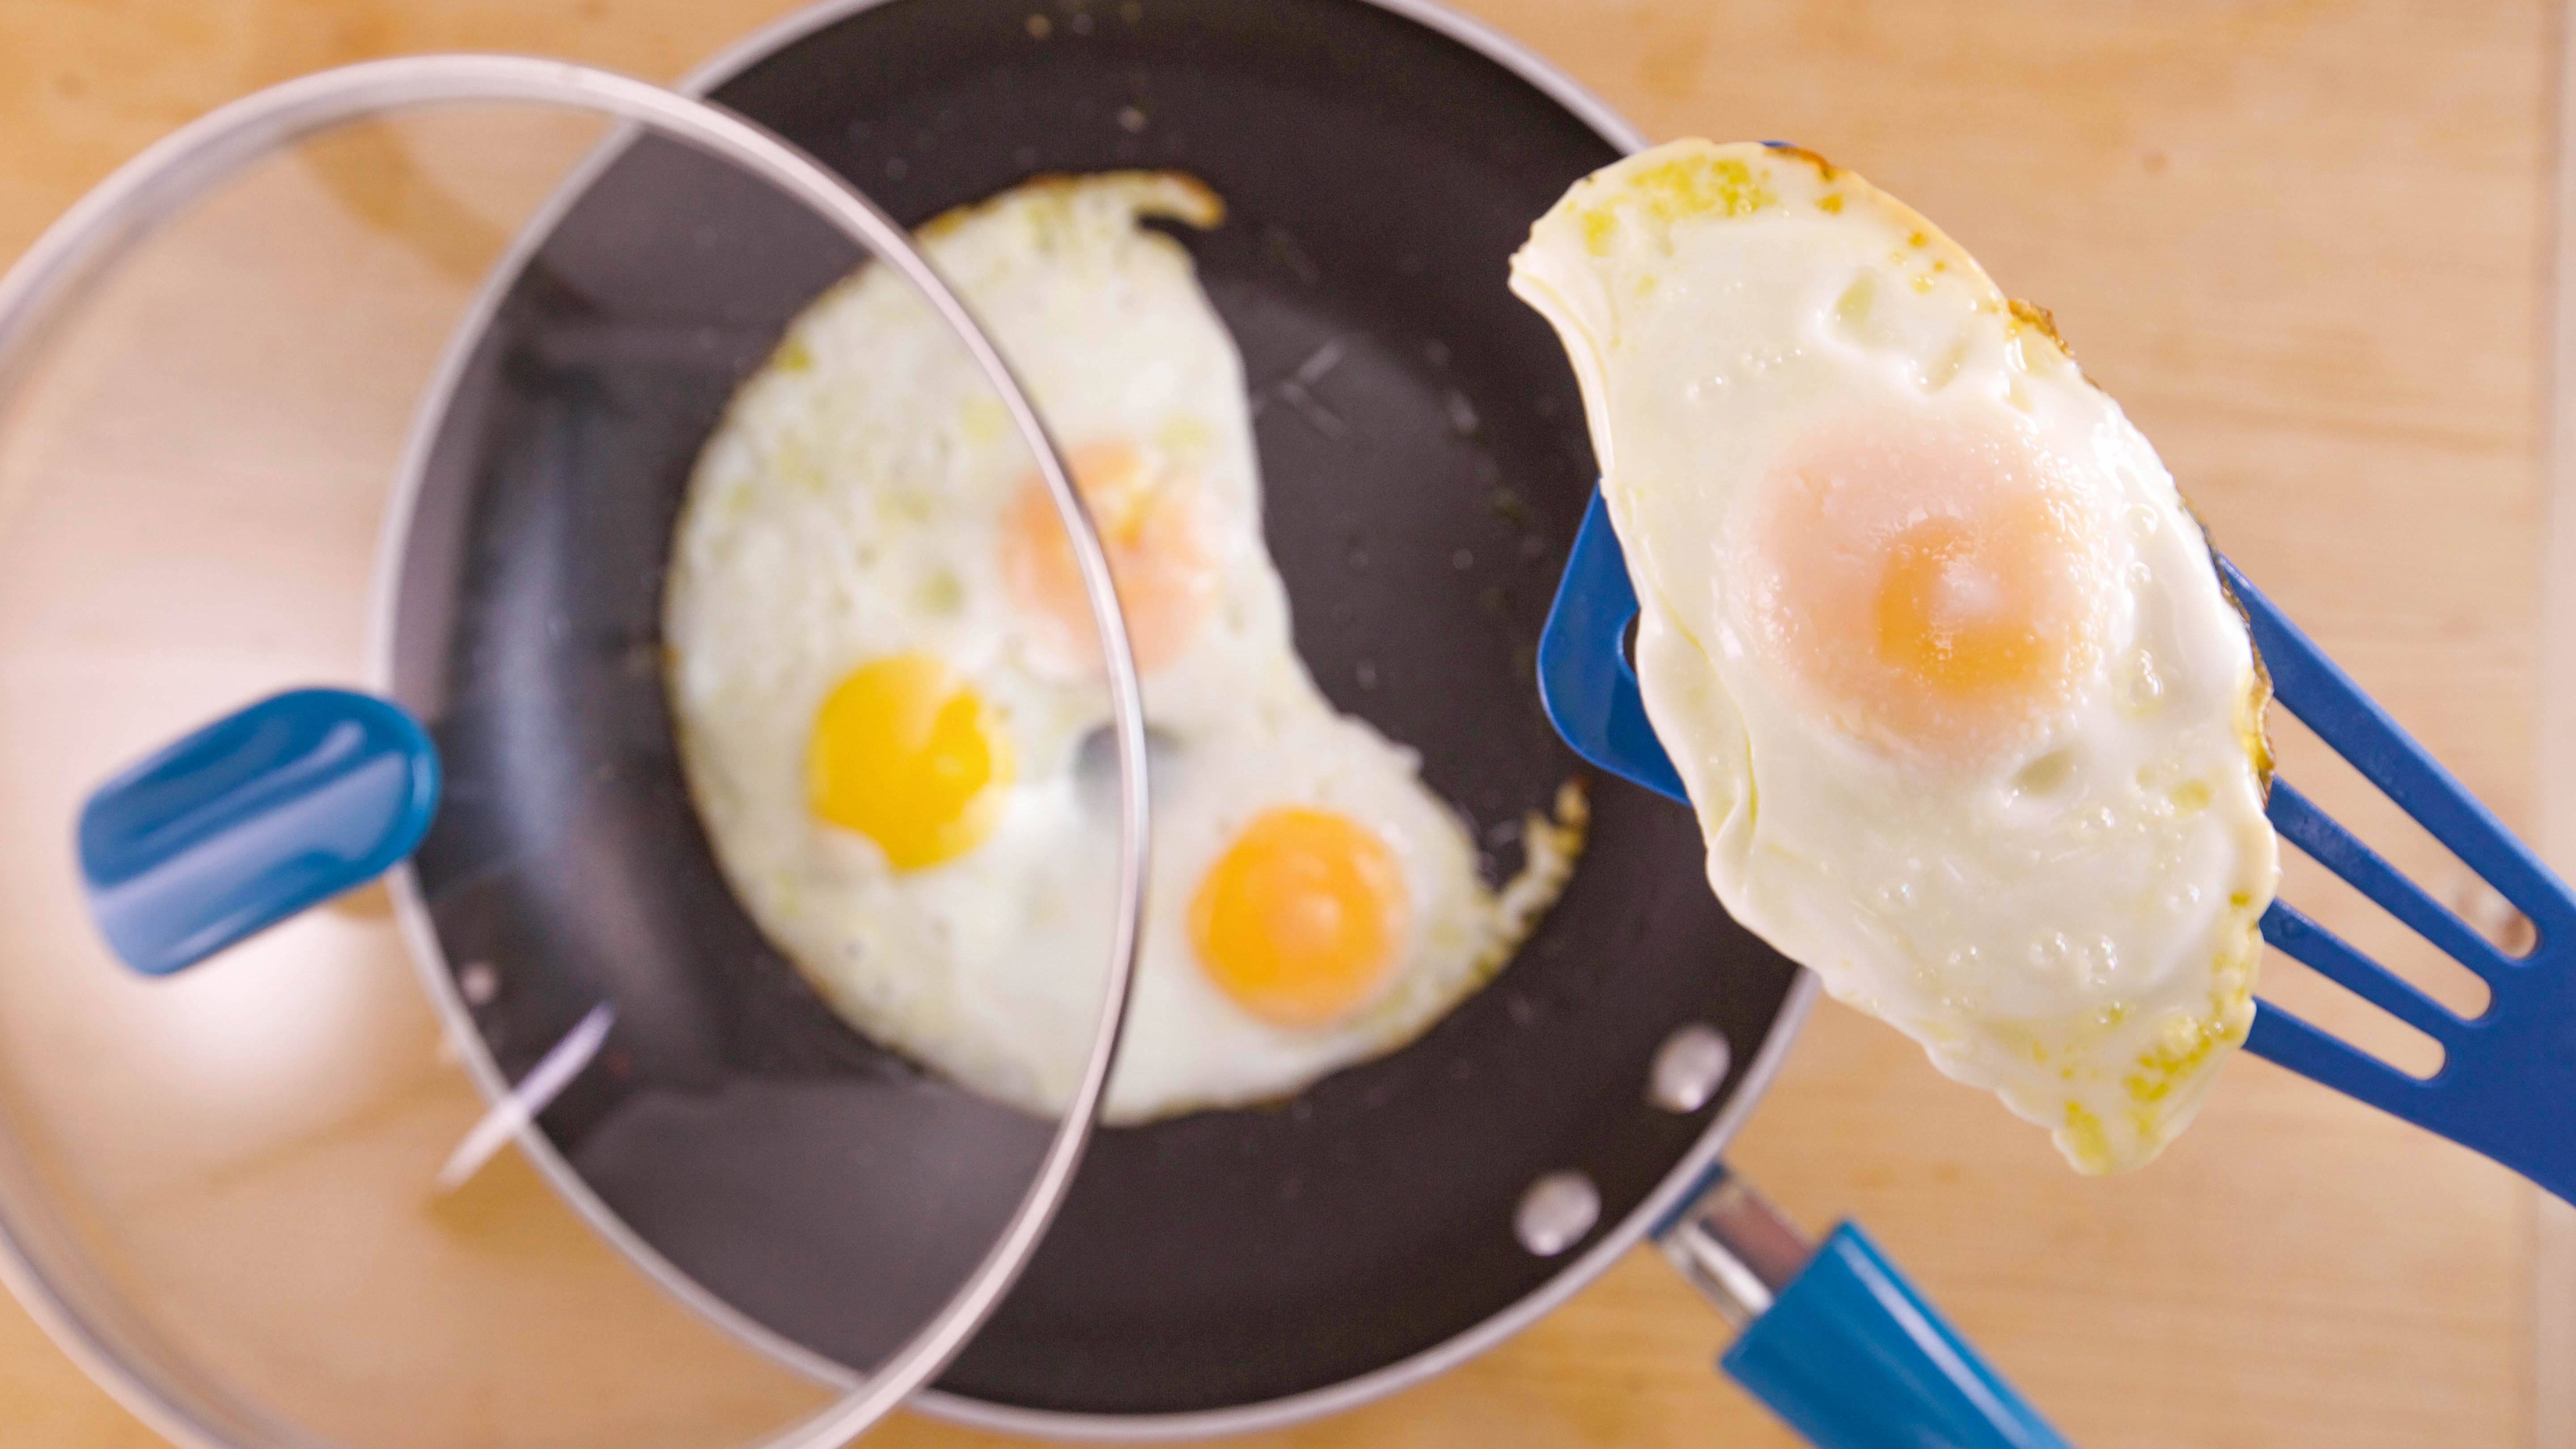 Sunny-Side Up Fried Eggs Recipe